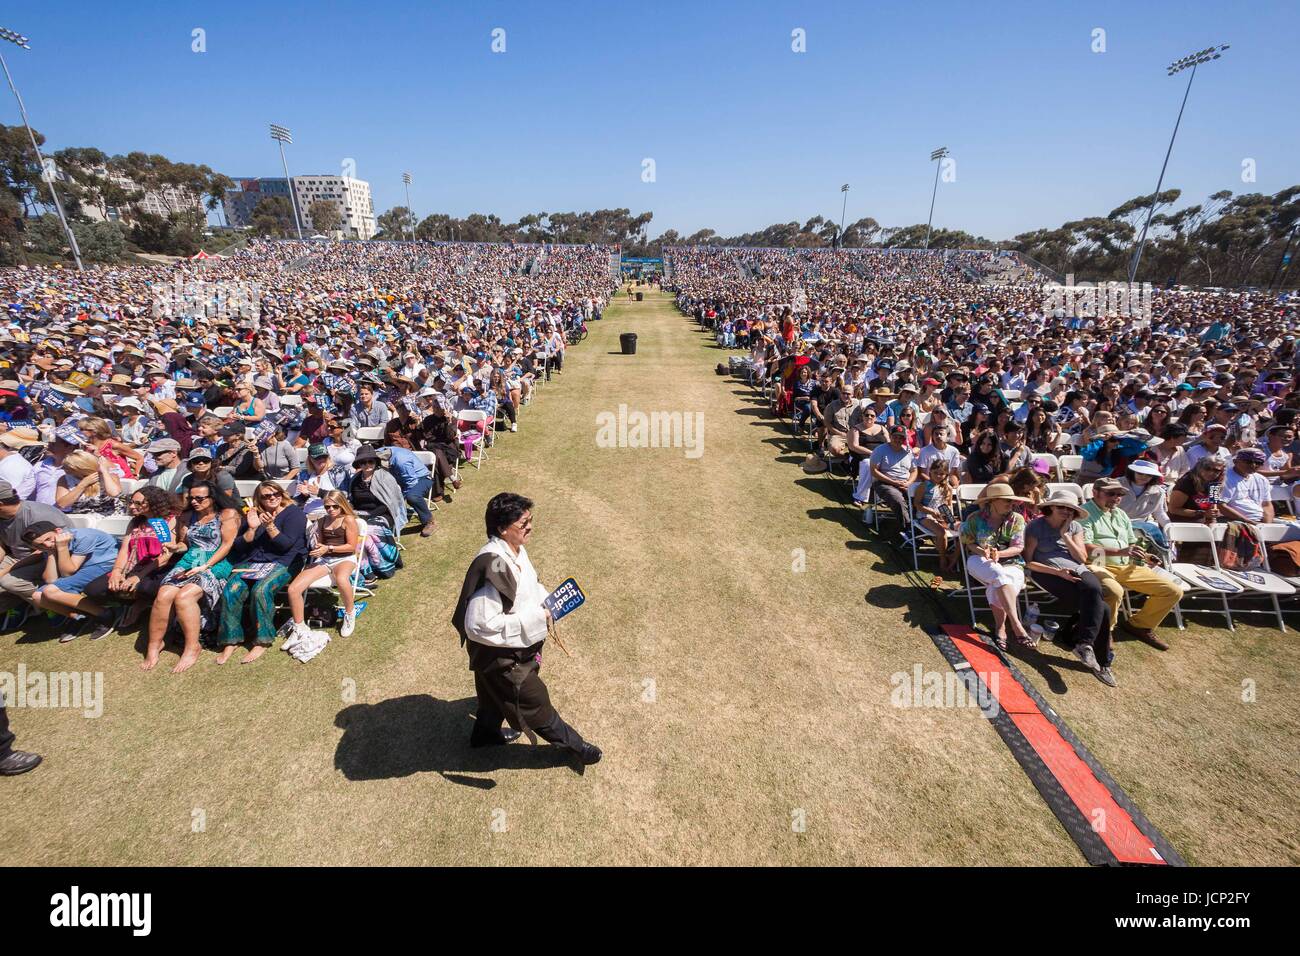 La Jolla, US. 16th June, 2017. His Holiness the 14th Dalai Lama speaks at.UC San Diego UCSD.He describes himself as a simple Buddhist monk. But to the world he is a renowned peace advocate, a beacon of hope for humanity, sharing inspirational messages with international audiences that range from young students to world leaders. Credit: ZUMA Press, Inc./Alamy Live News Stock Photo